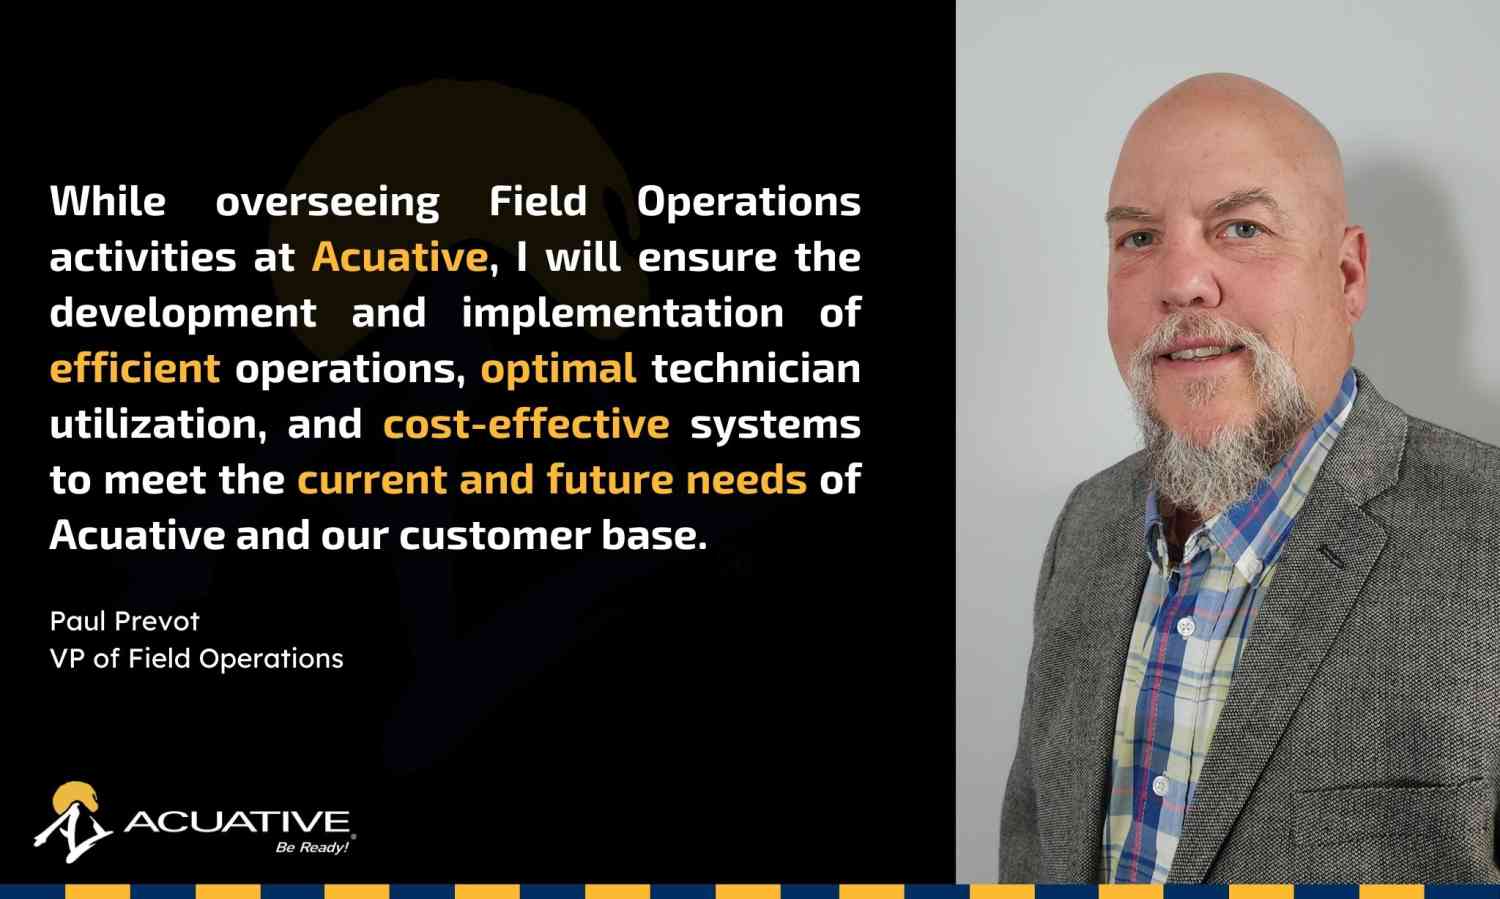 Paul Prevot, Senior Vice President of Field Operations for Acuative, a managed network service provider